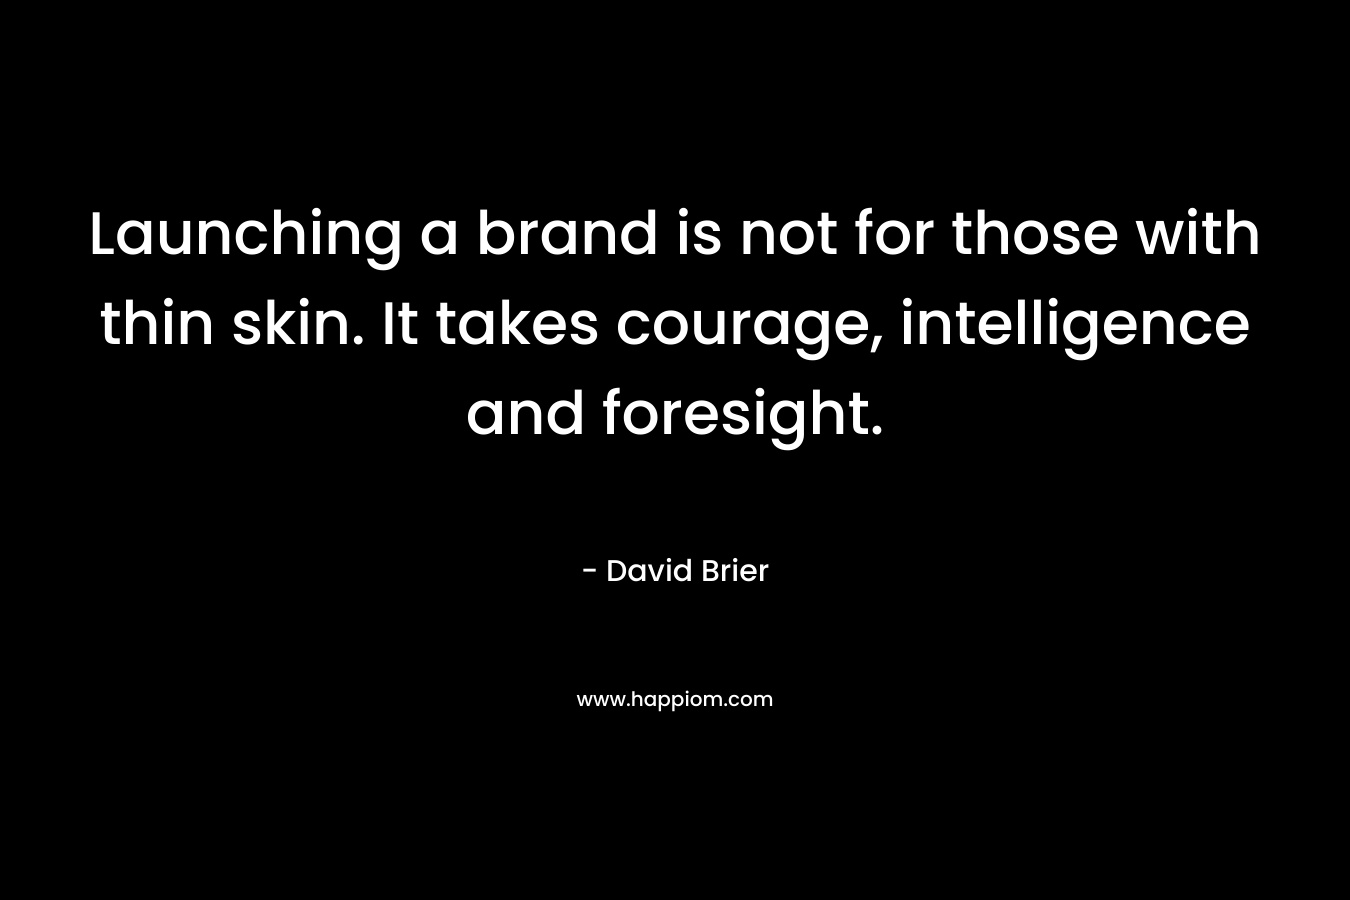 Launching a brand is not for those with thin skin. It takes courage, intelligence and foresight.